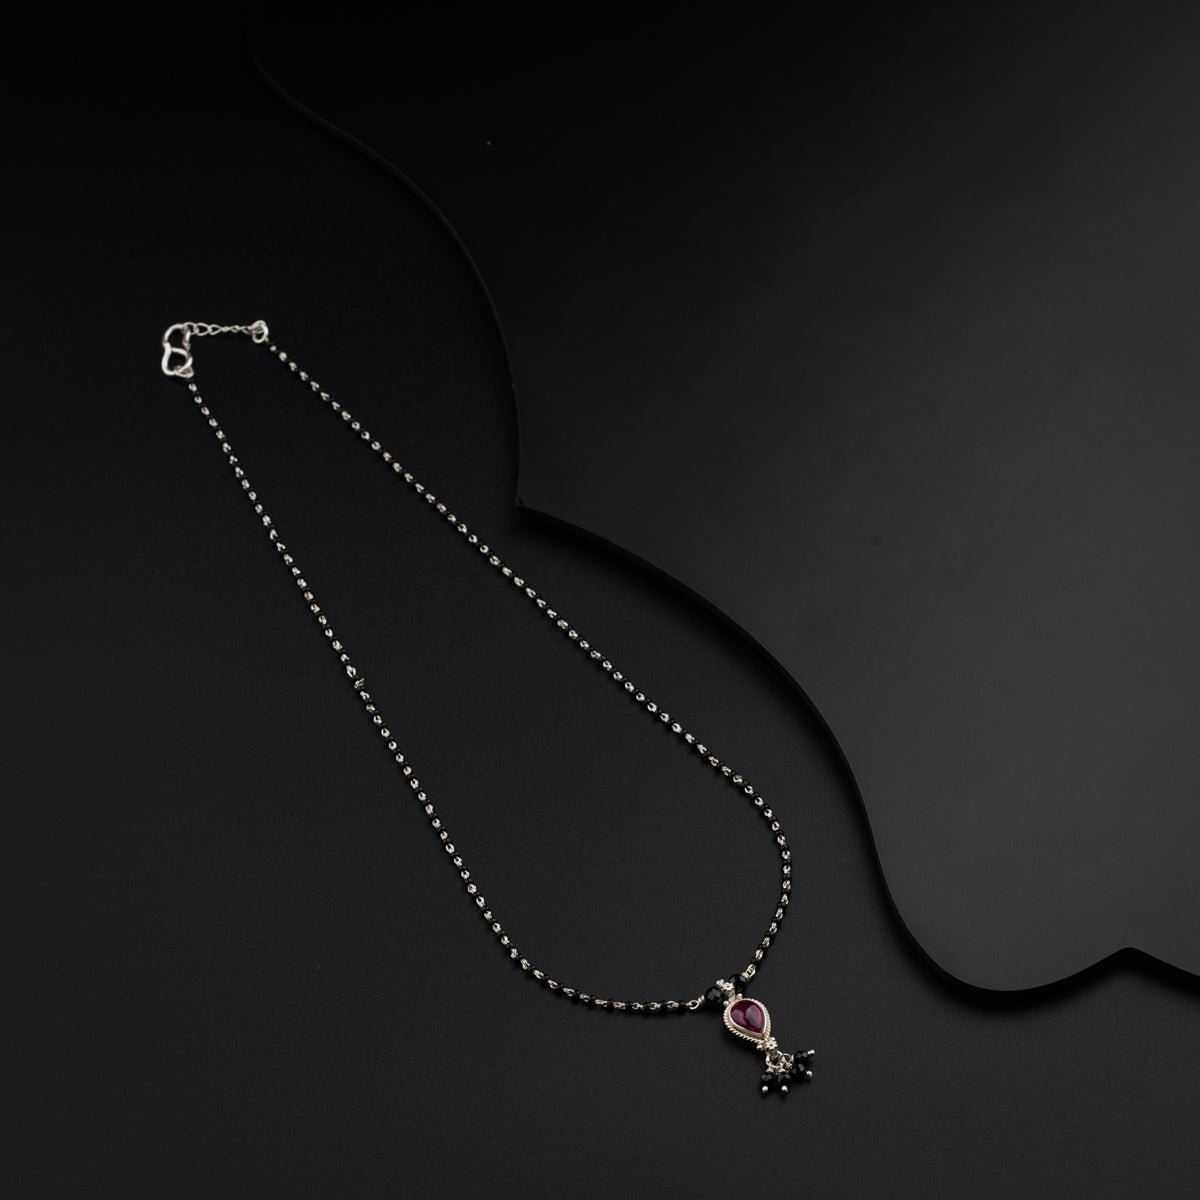 a necklace with a pink stone on a black background